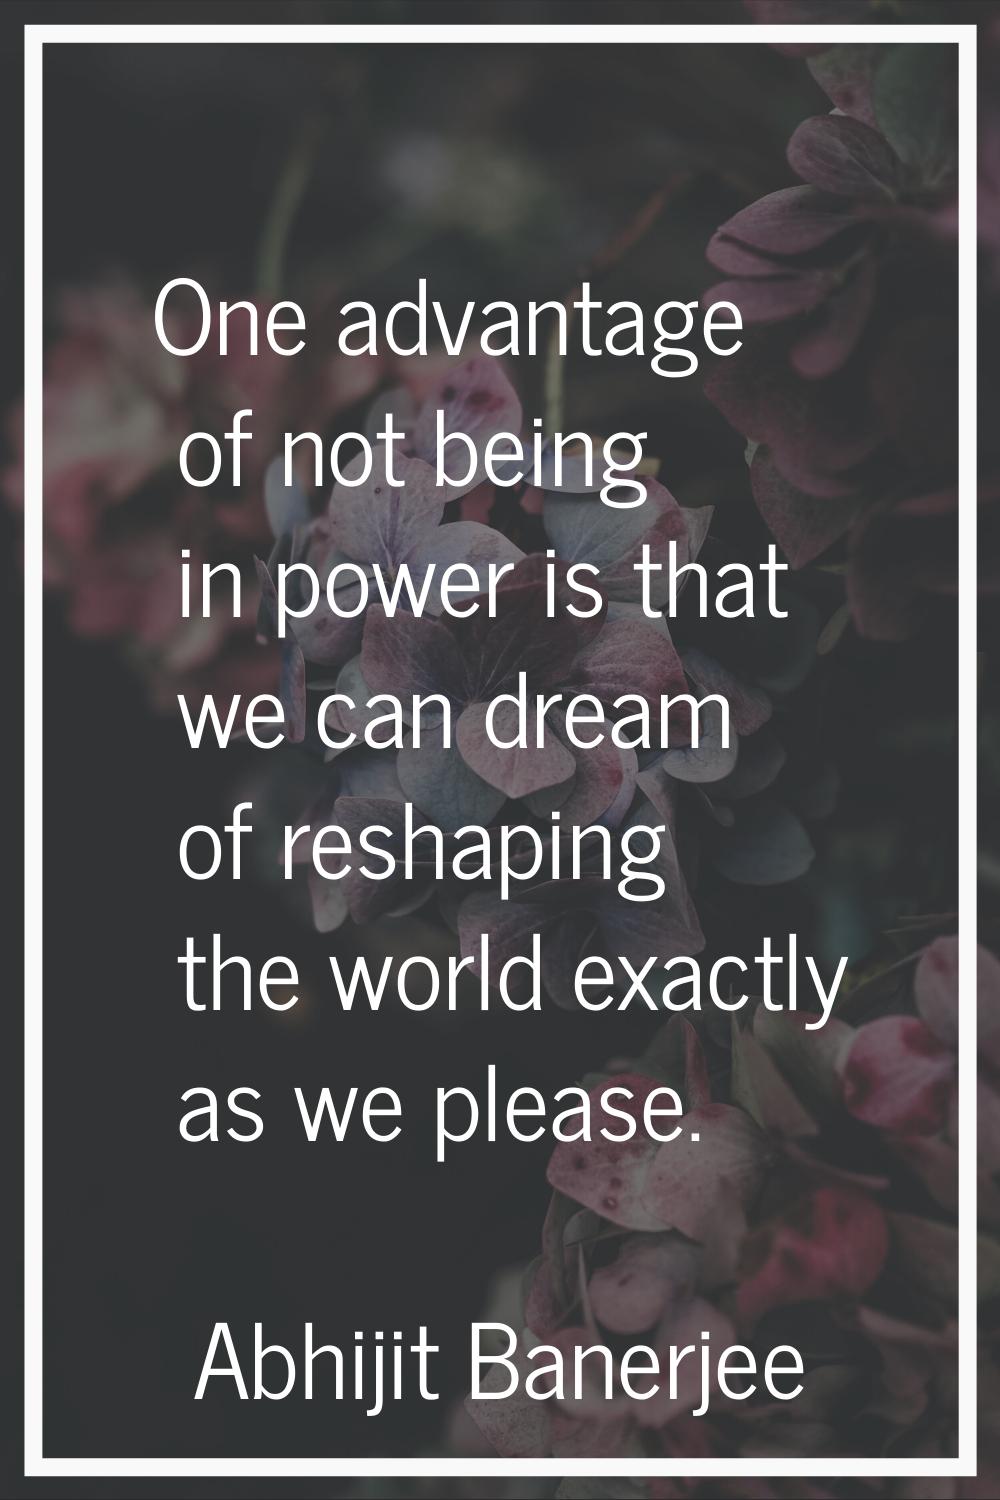 One advantage of not being in power is that we can dream of reshaping the world exactly as we pleas